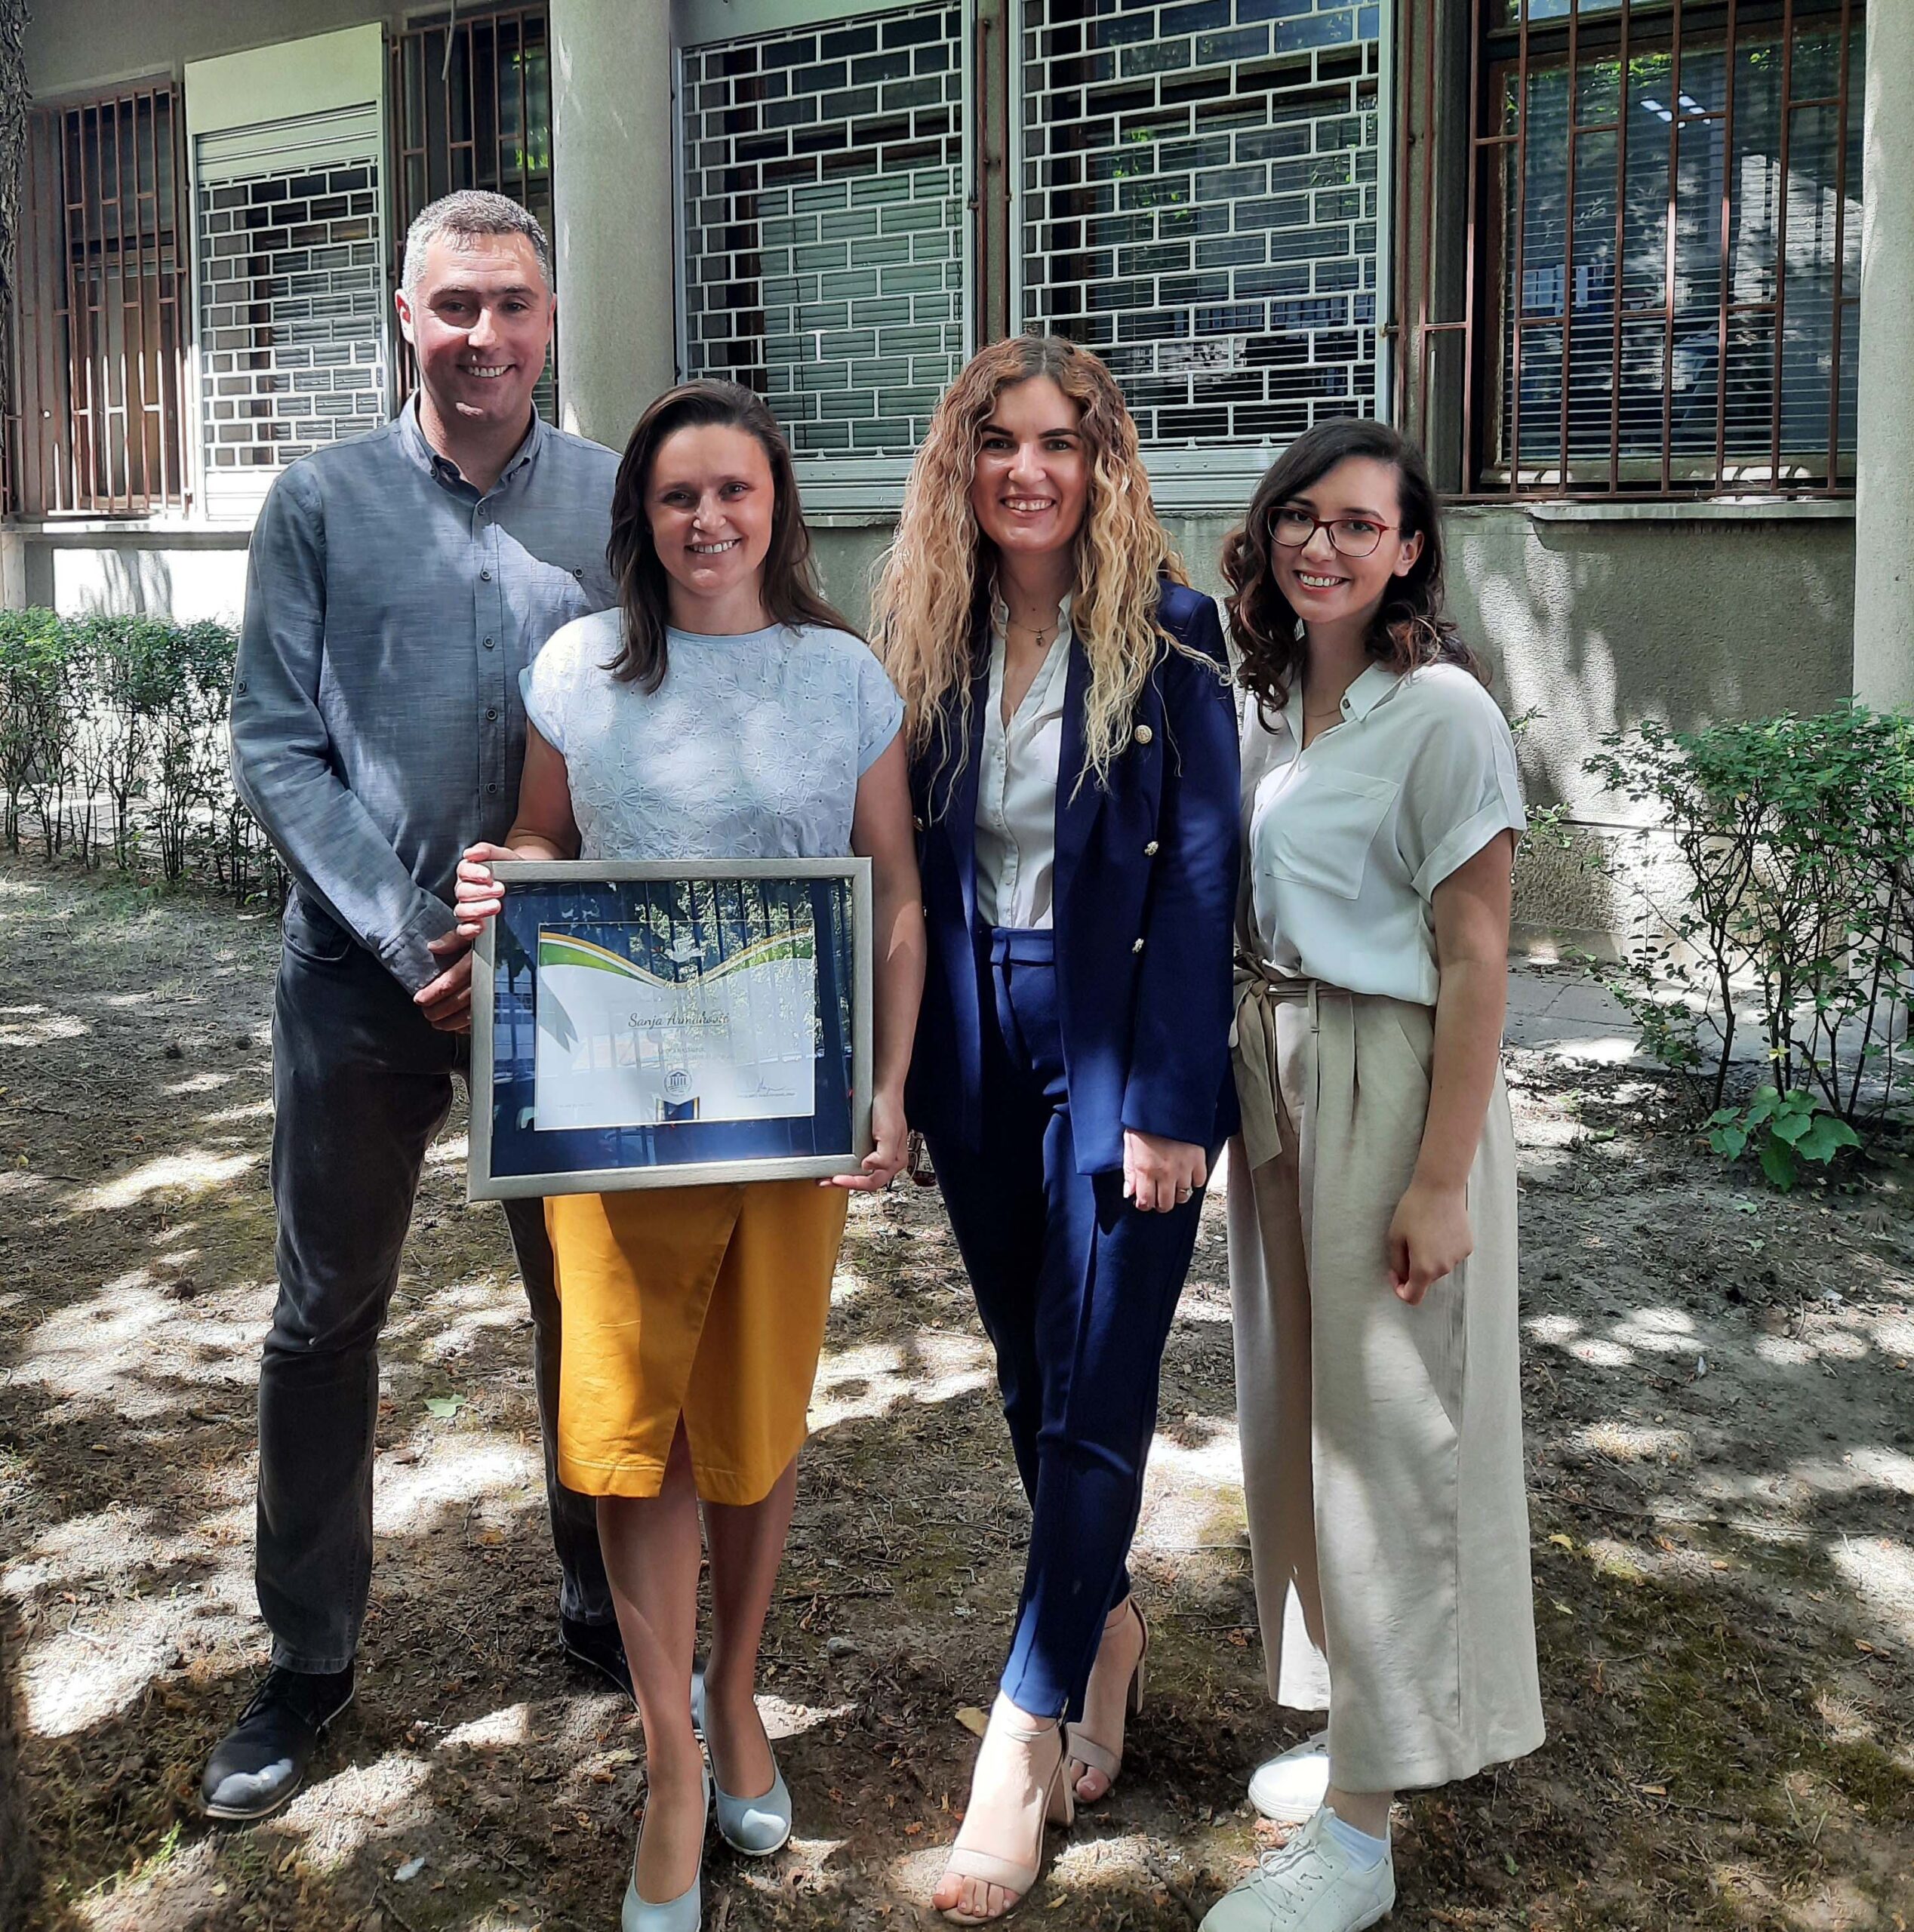 EMOS research group in 2021. (from left to right: Stevan, Sanja, Maria and Andrijana)